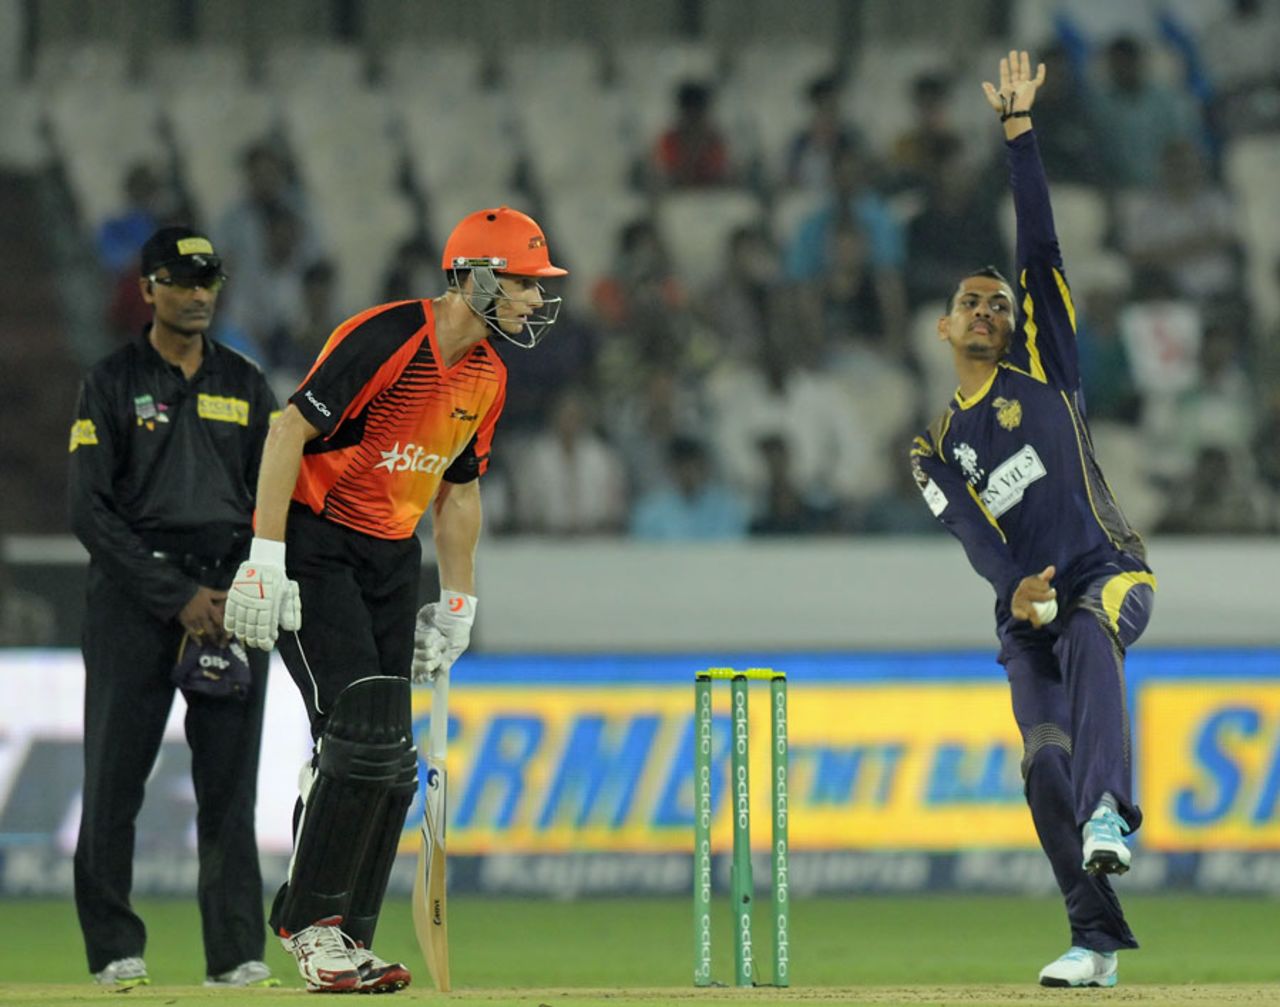 Sunil Narine in his delivery stride, Kolkata Knight Riders v Perth Scorchers, CLT20, Group A, Hyderabad, September 24, 2014